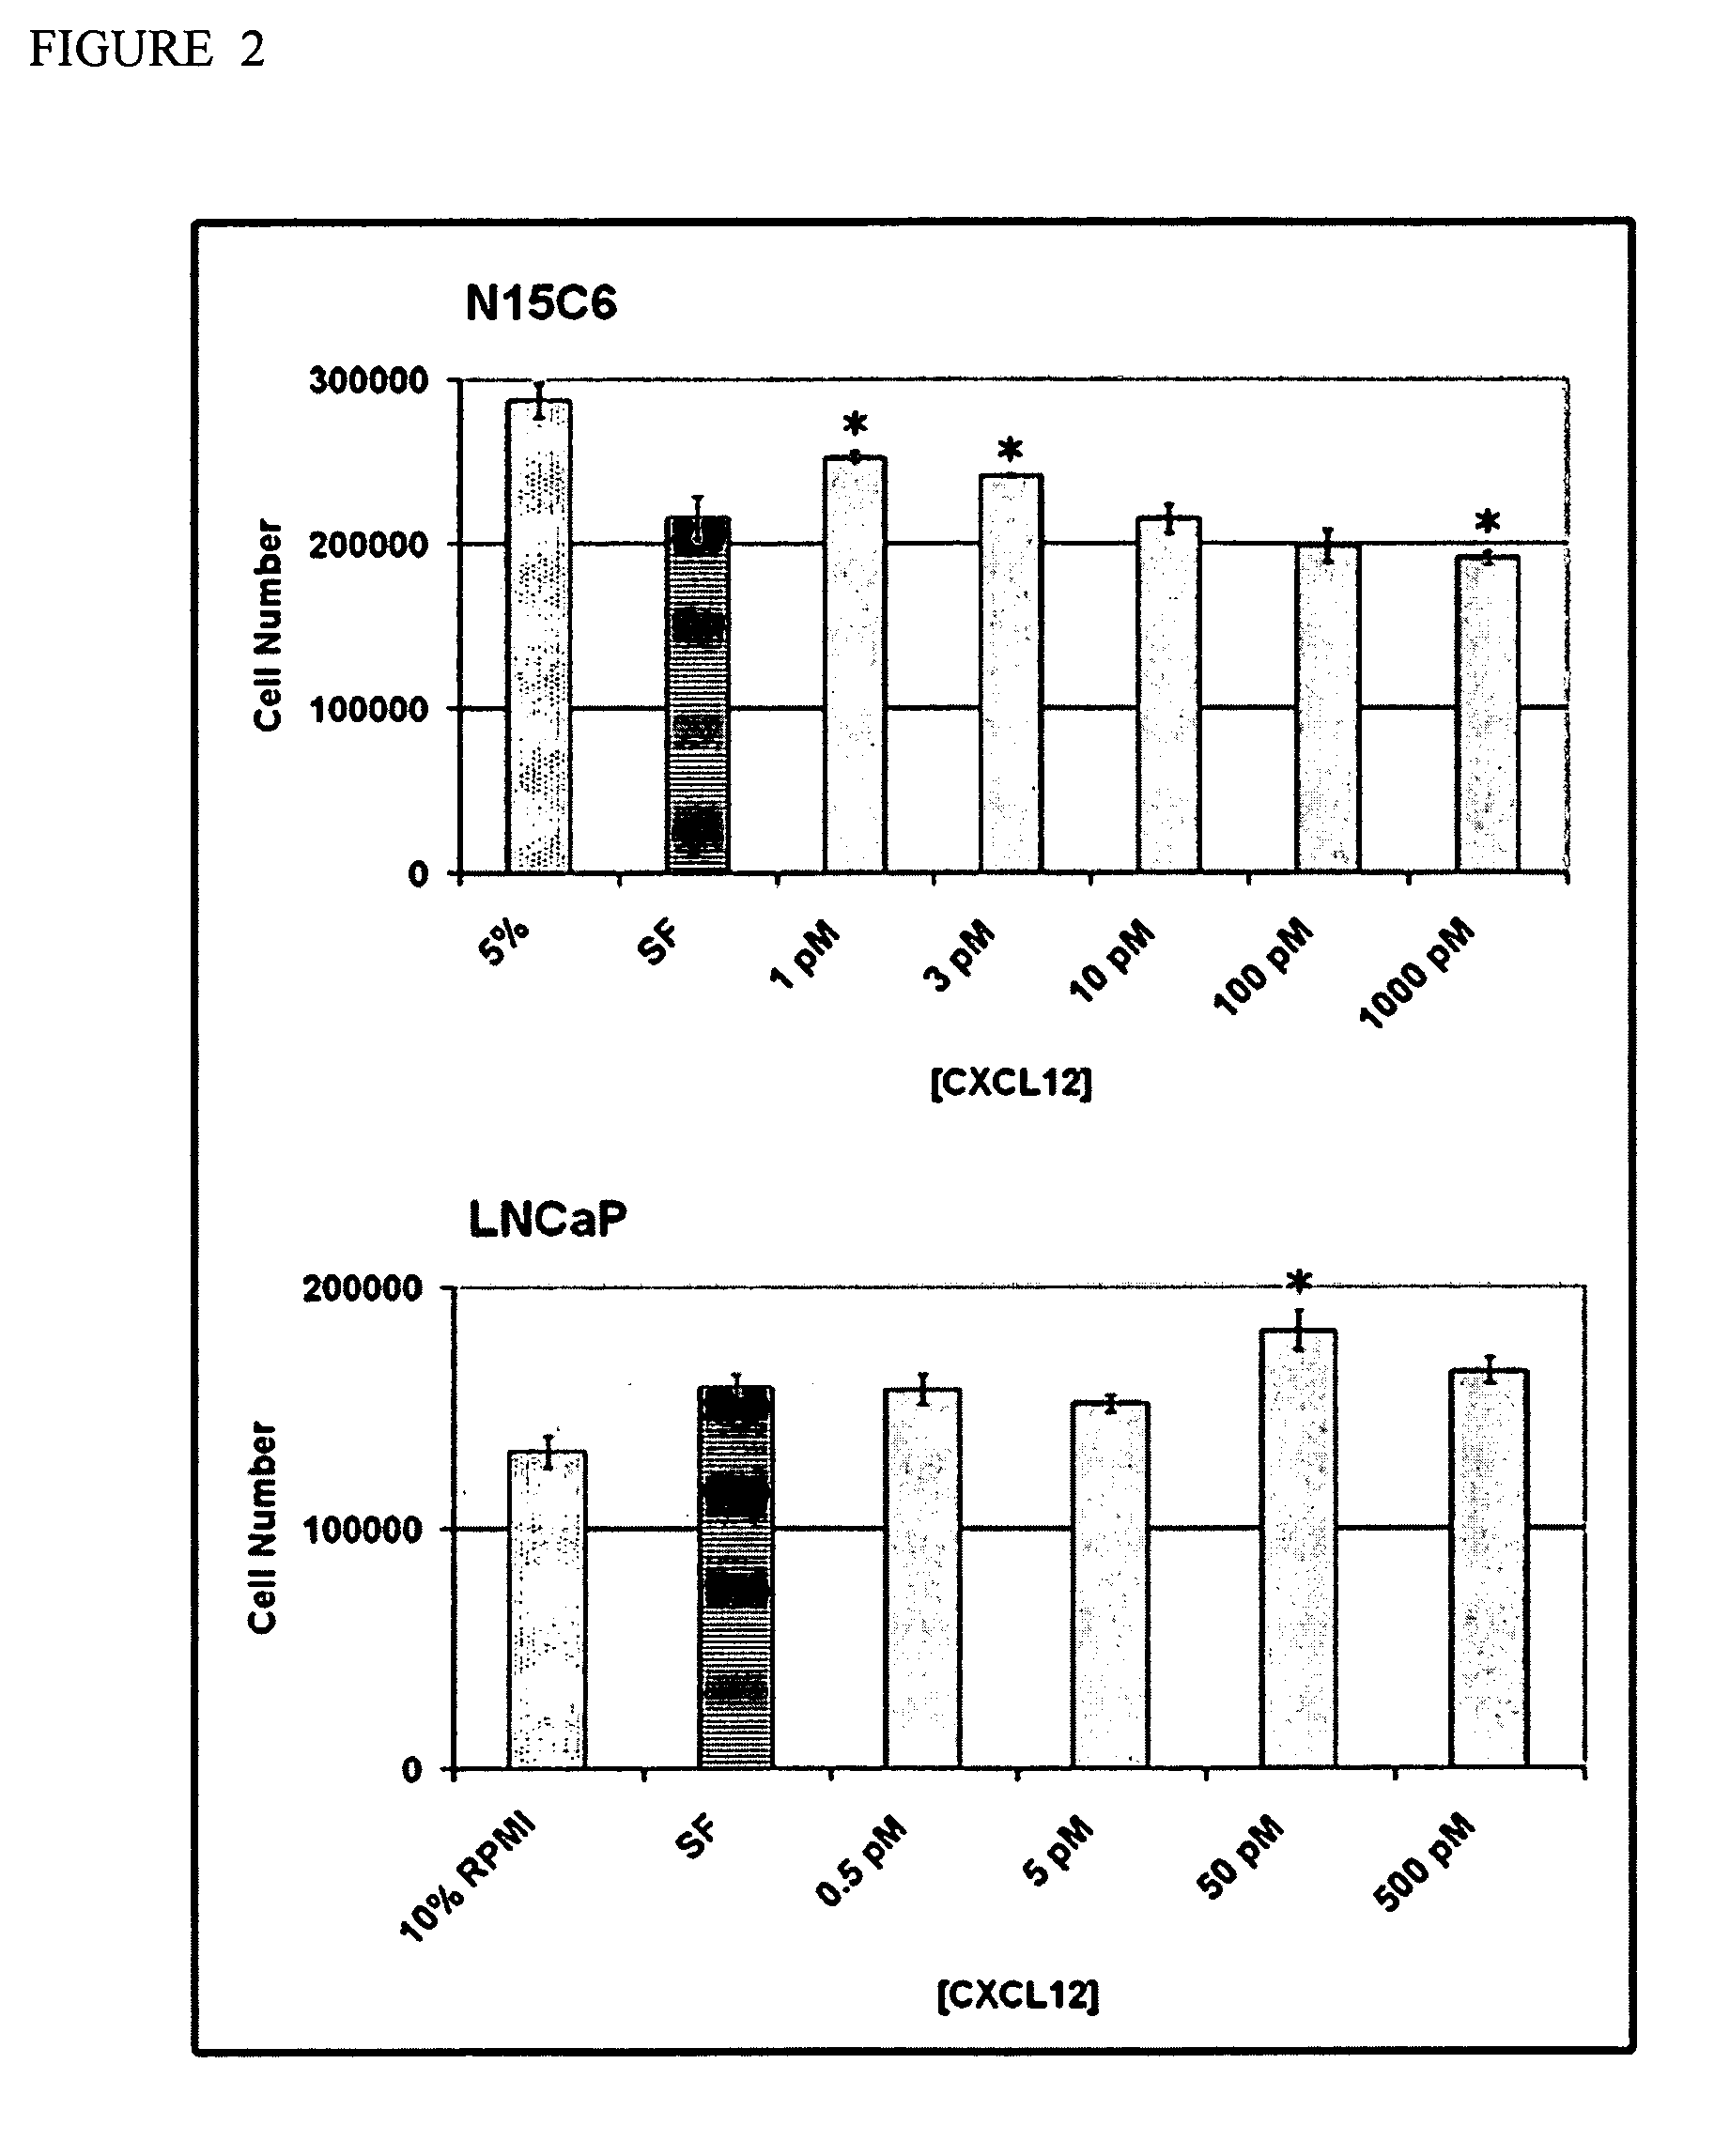 Compositions and methods for detecting and treating prostate disorders